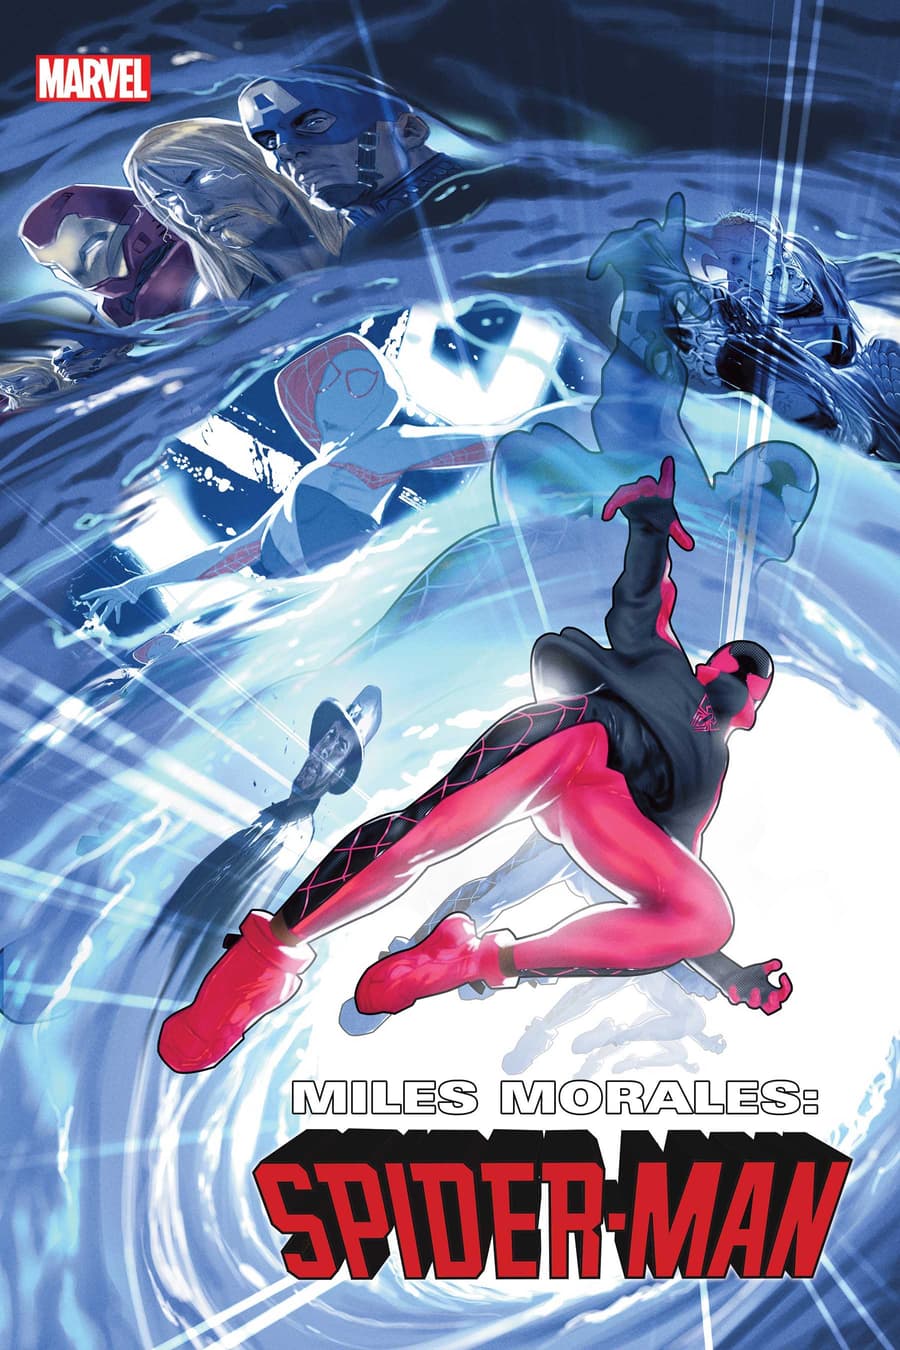 MILES MORALES: SPIDER-MAN #36 Cover by TAURIN CLARKE